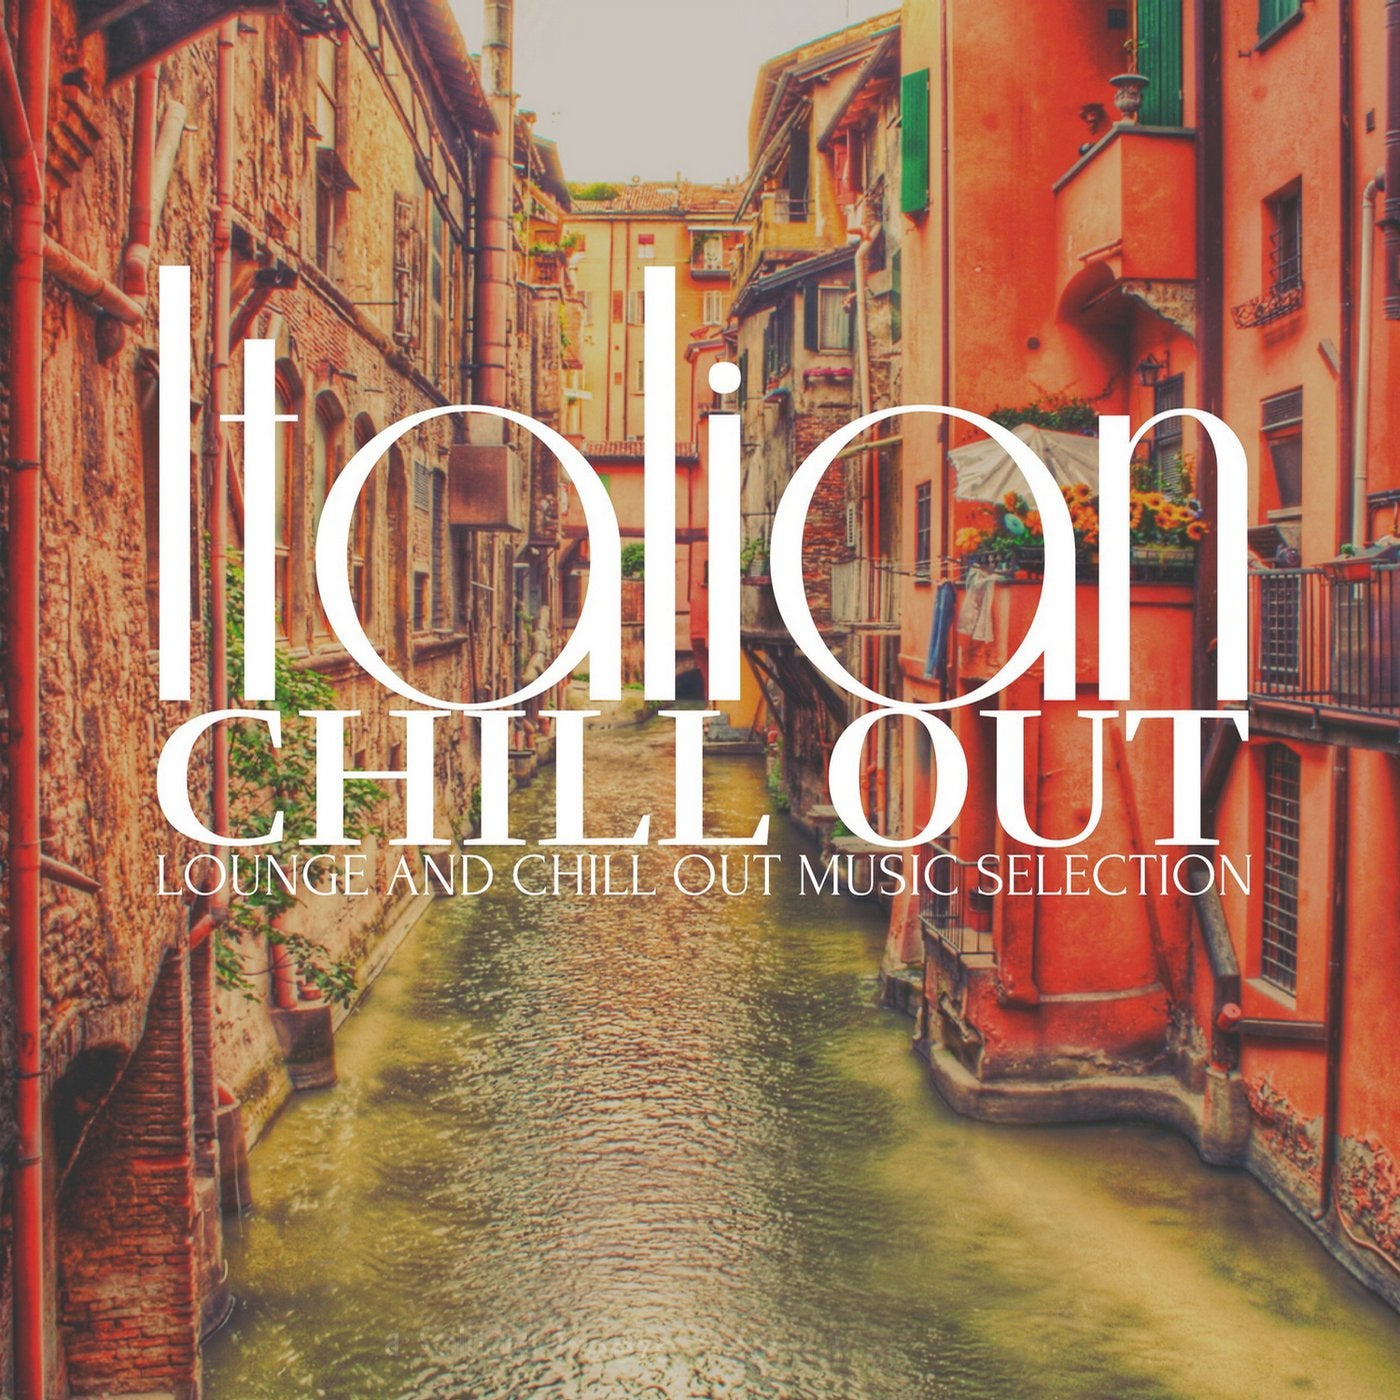 Italian Chill Out (Lounge and Chill out Music Selection)